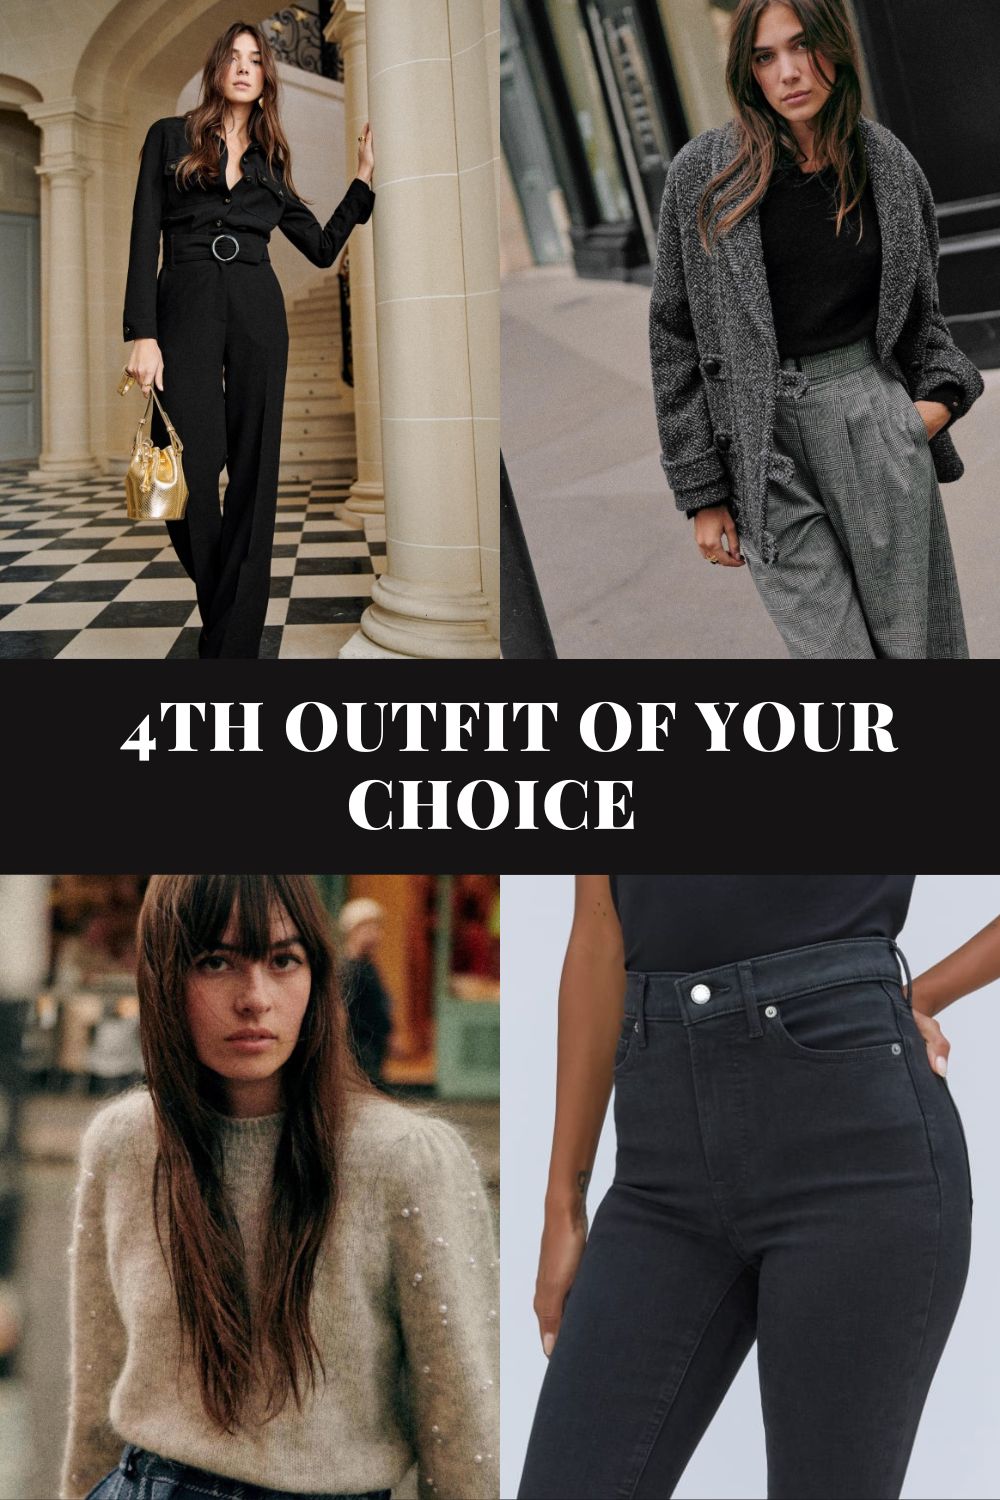 4th Outfit Of Your Choice